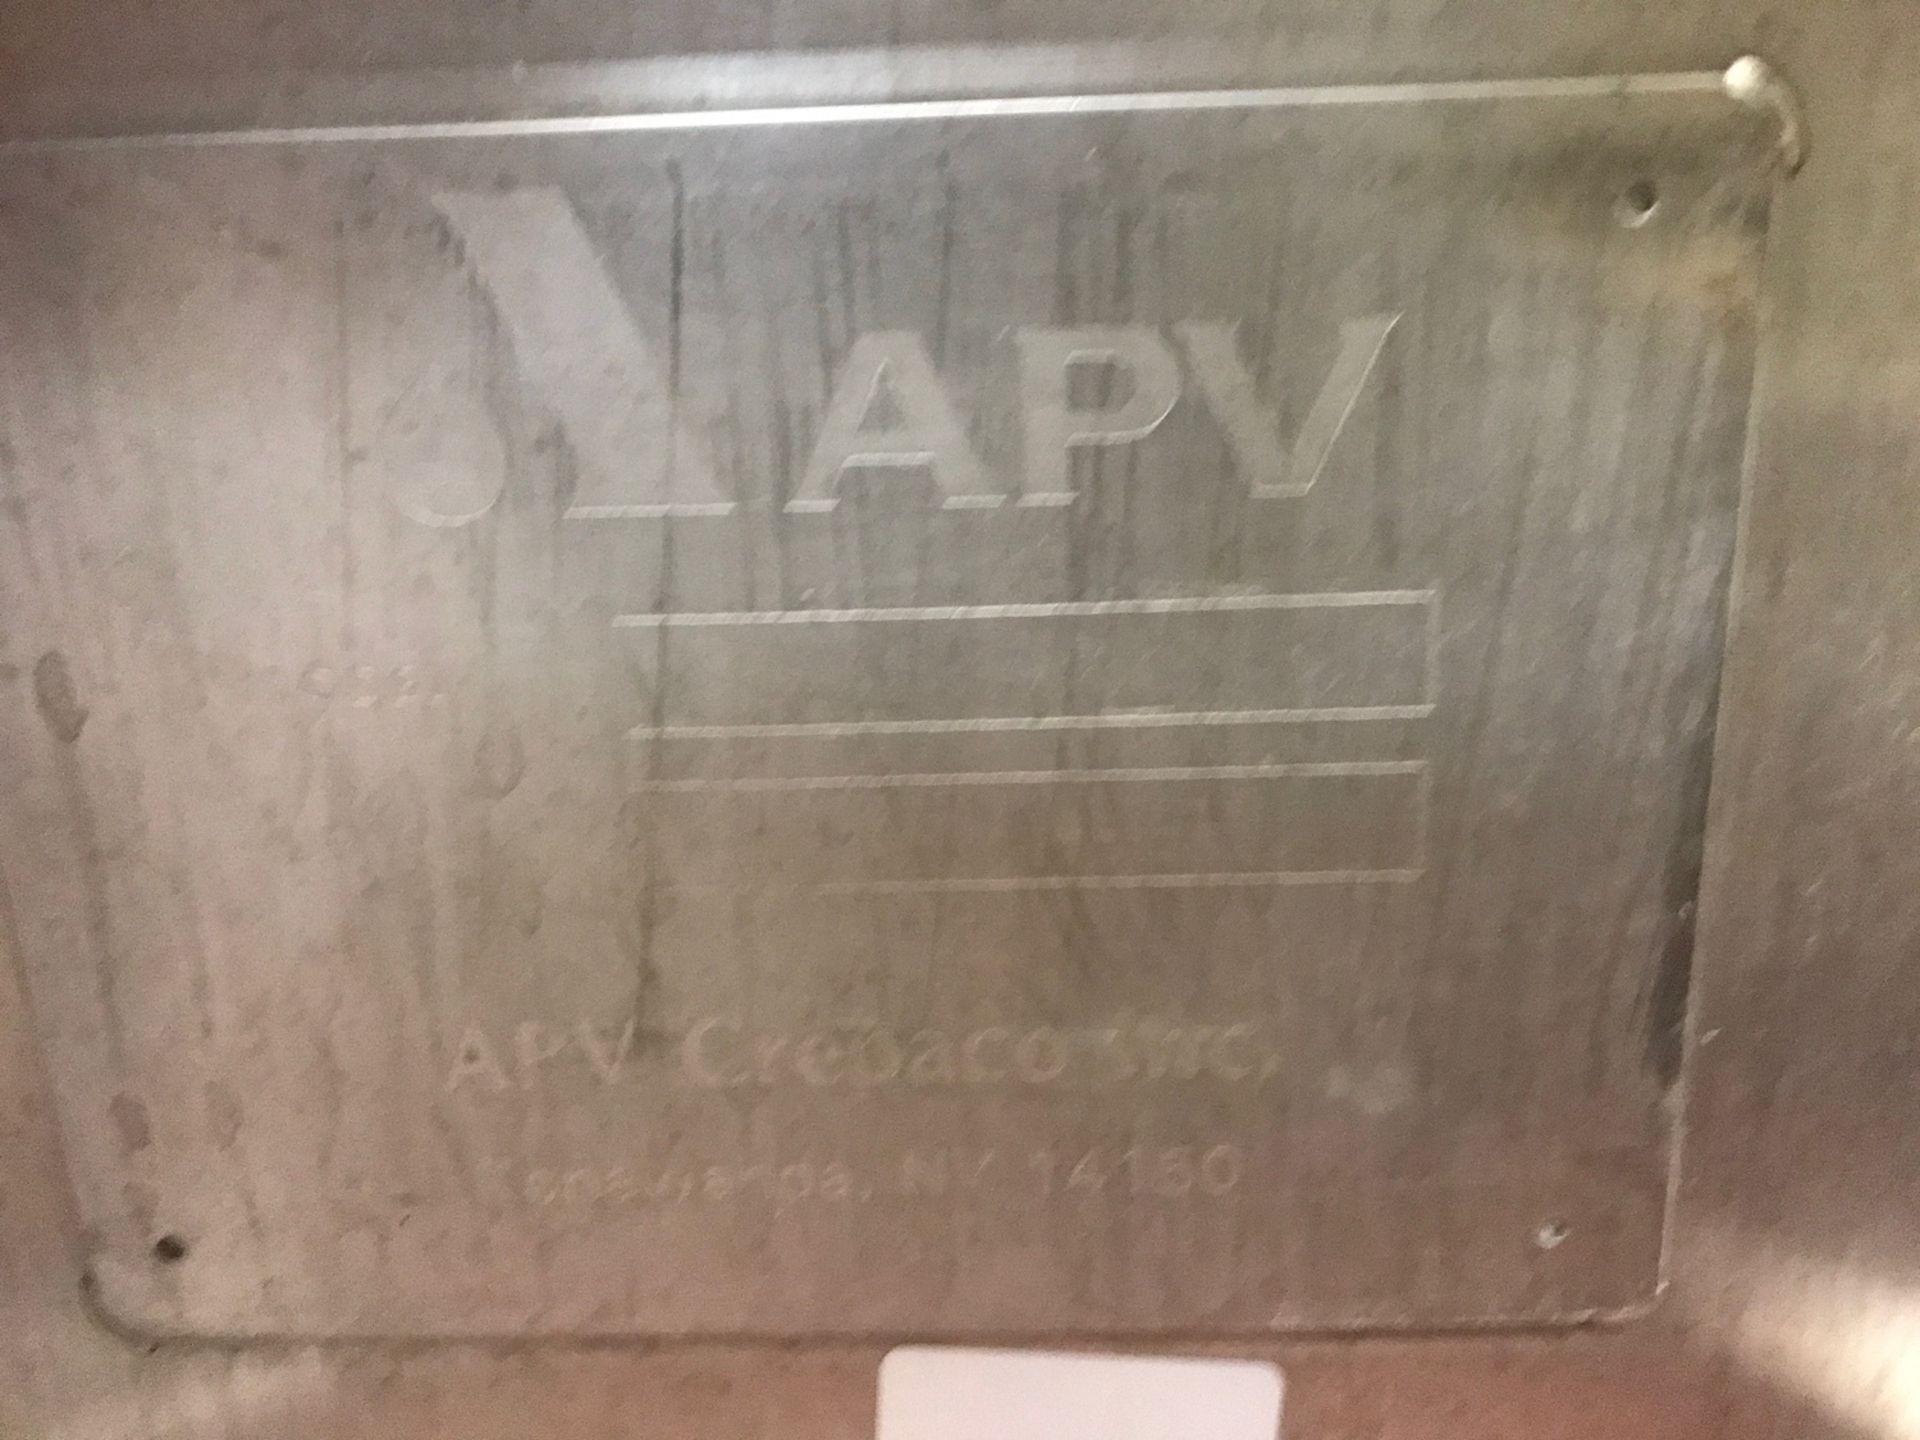 APV Model SR230-S Stainless Steel Tie Bar Plate Heat Exchanger, 2.5" Connections - Image 2 of 2